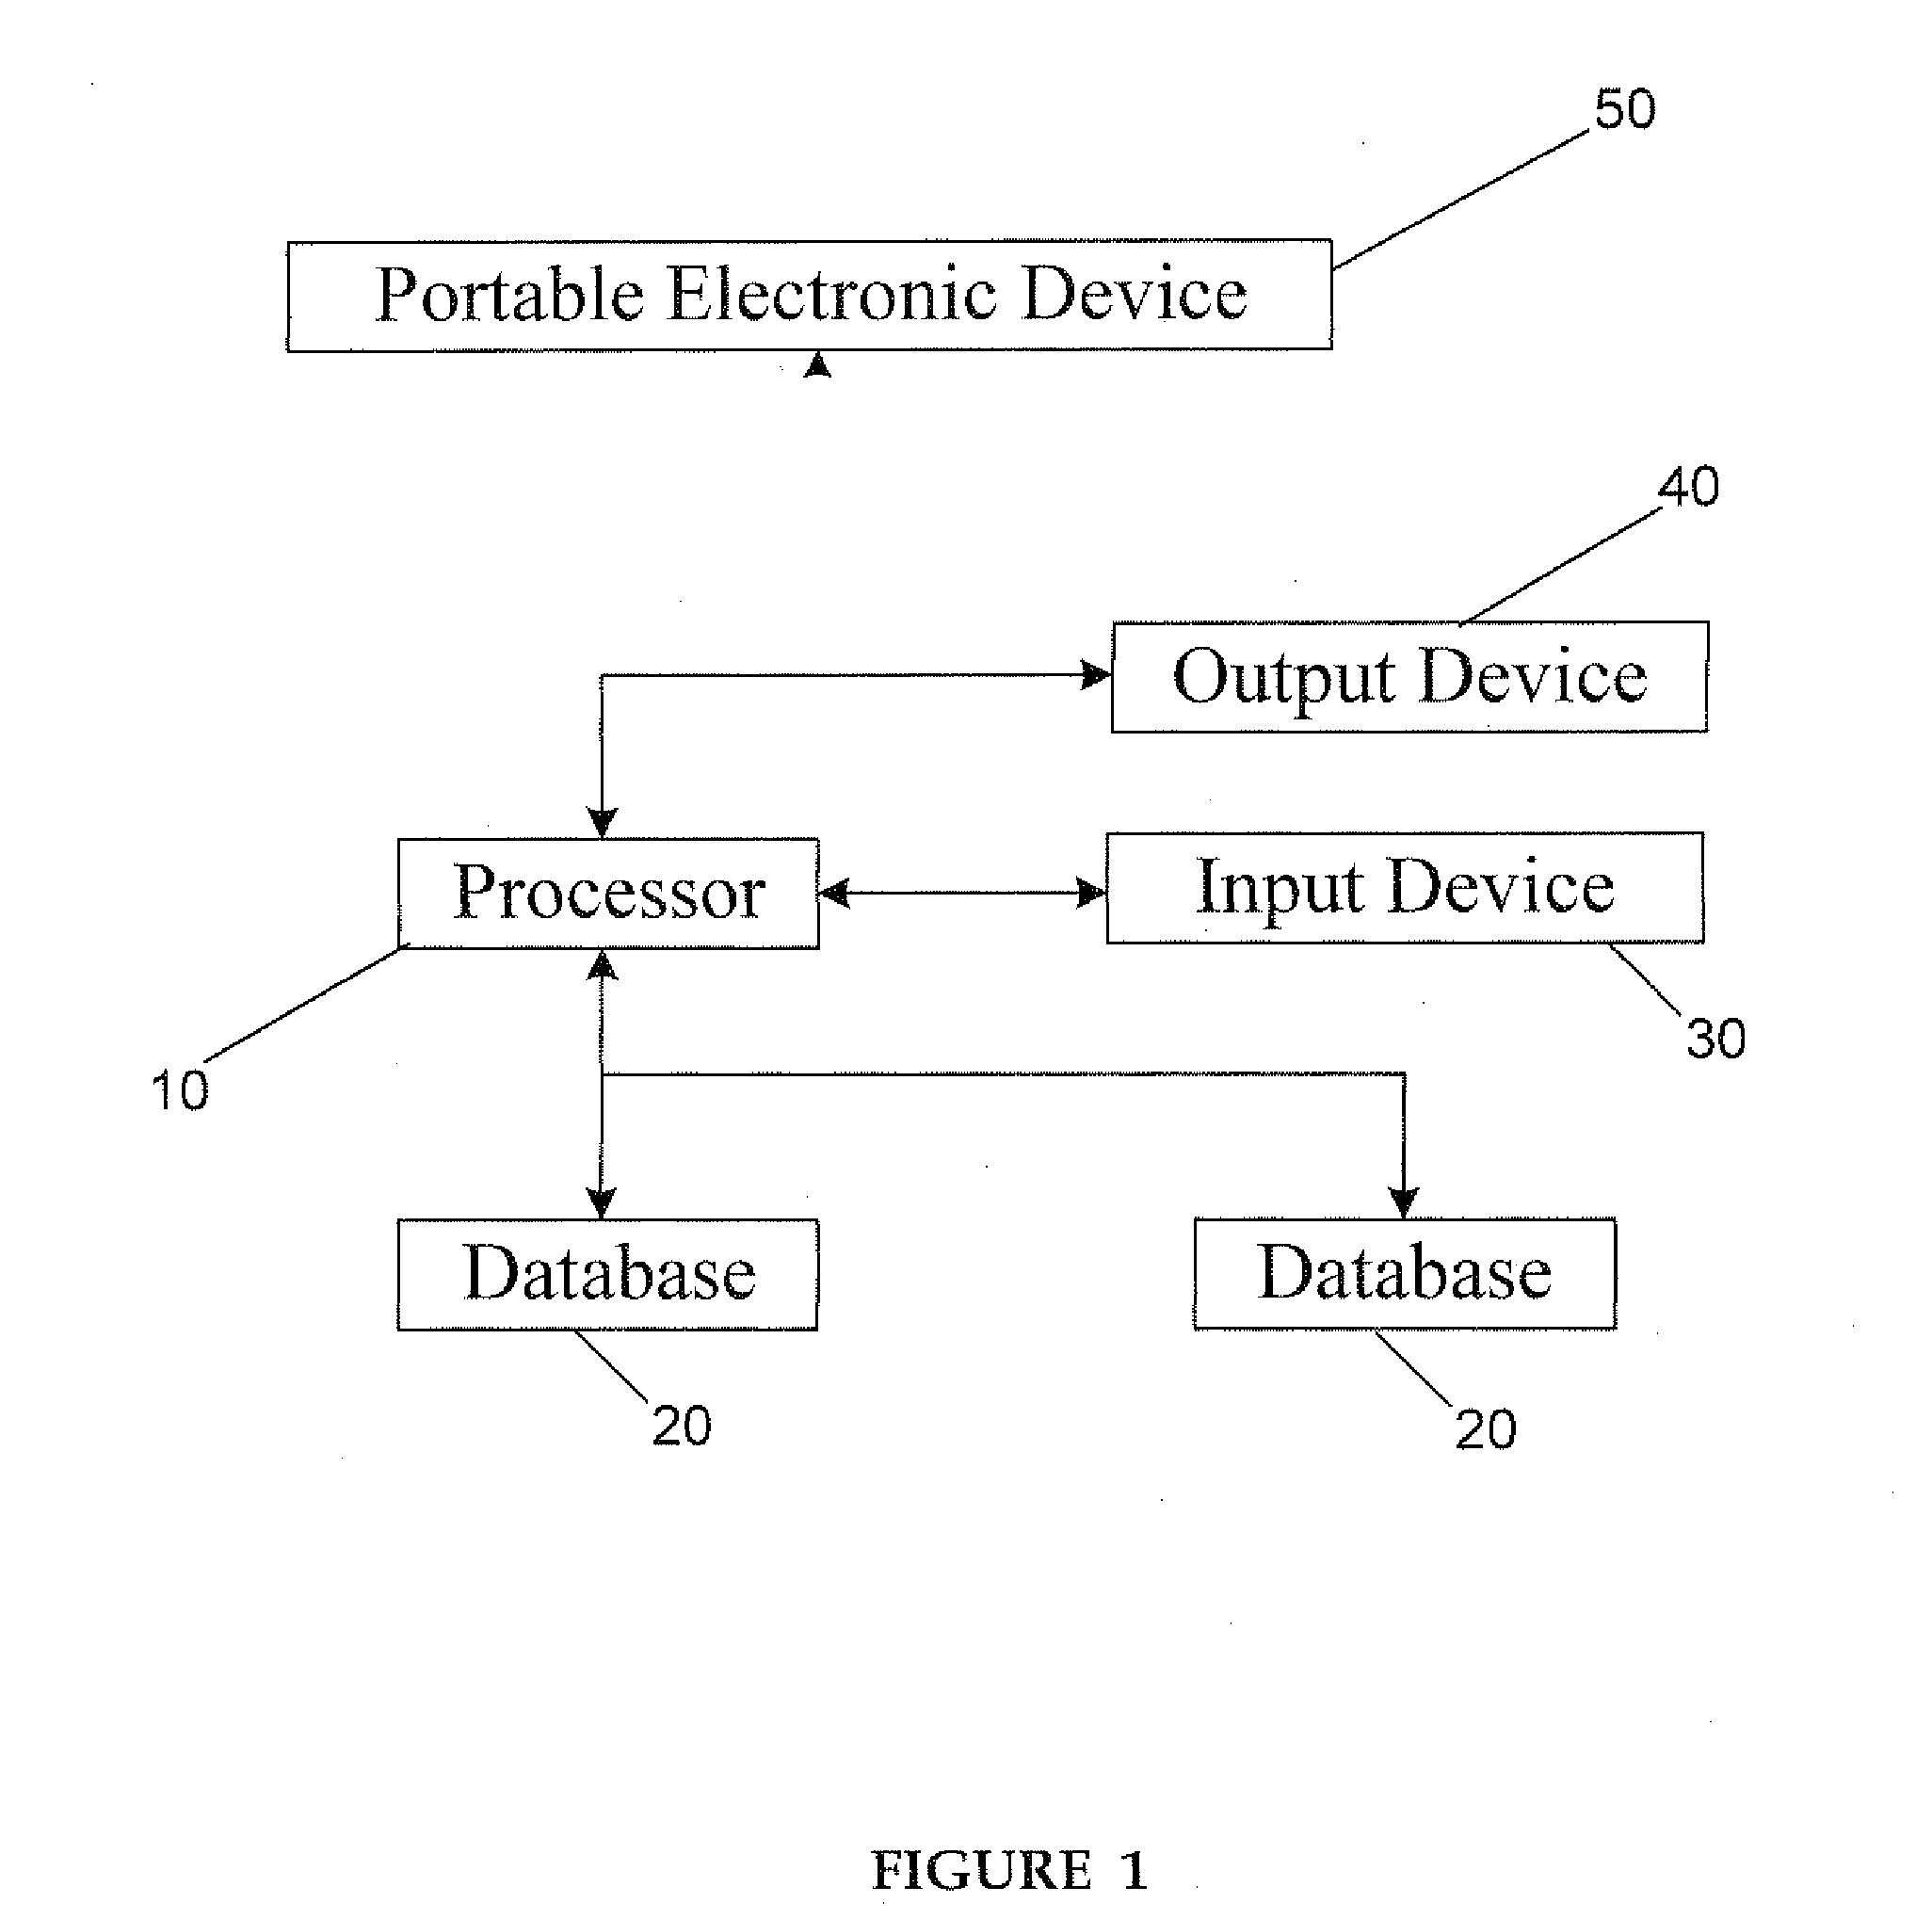 Operation and method for prediction and management of the validity of subject reported data